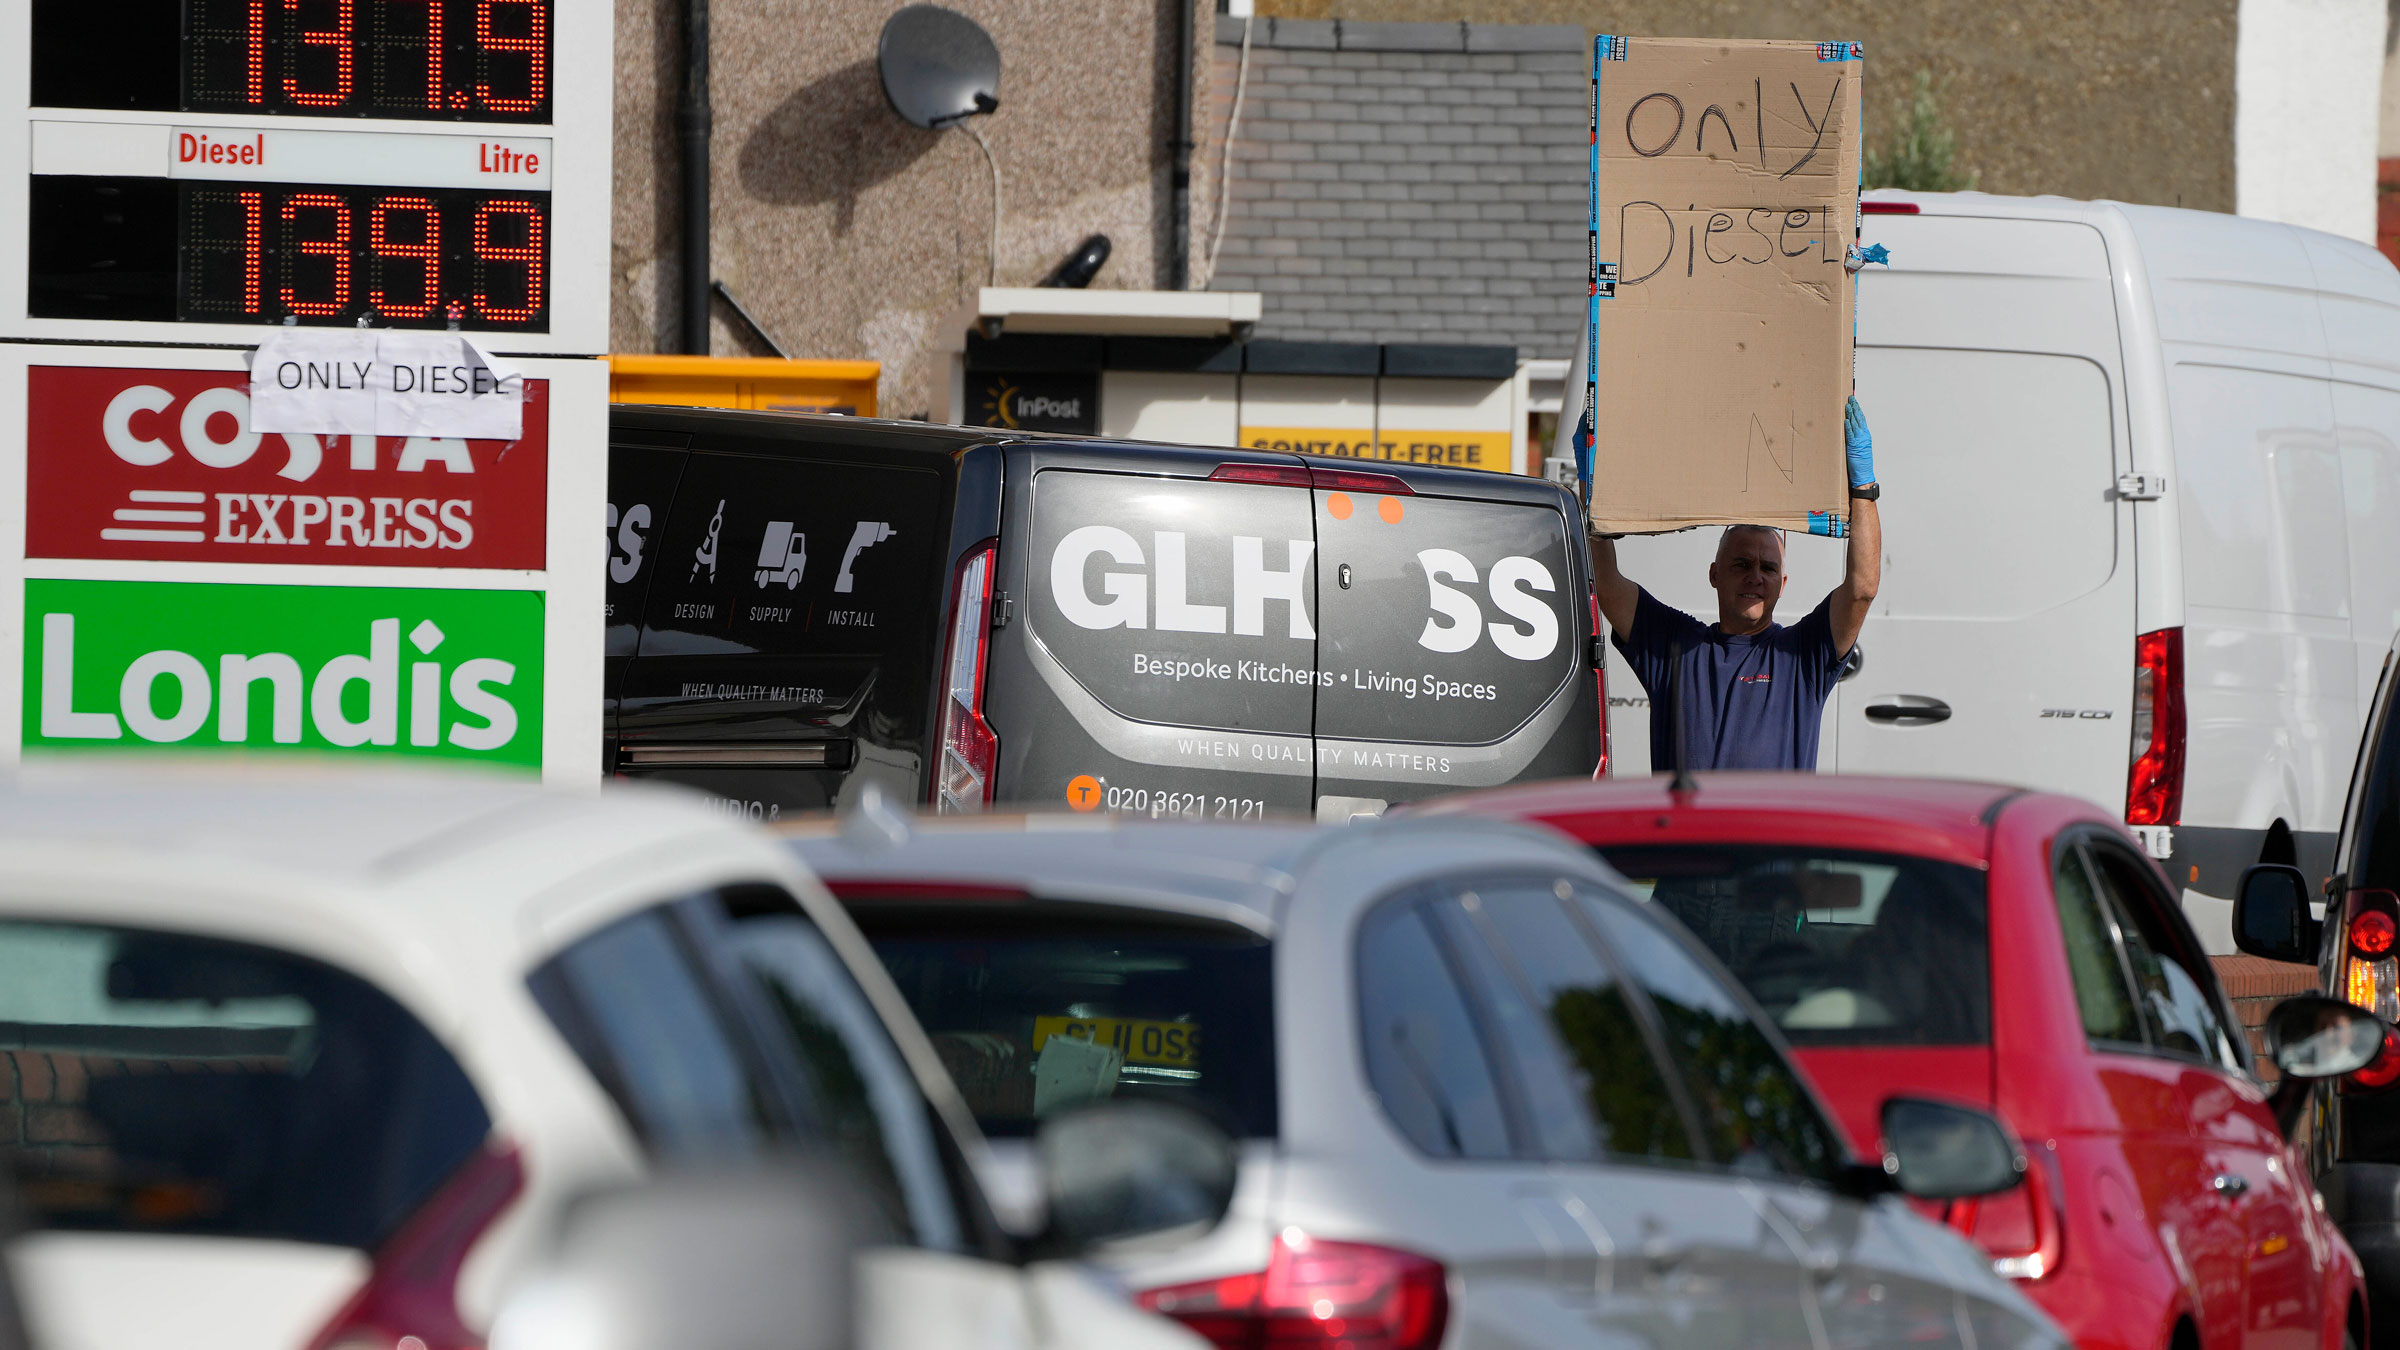 Drivers line up for fuel as a man holds a sign saying "only diesel" at a gas station in London on Tuesday.